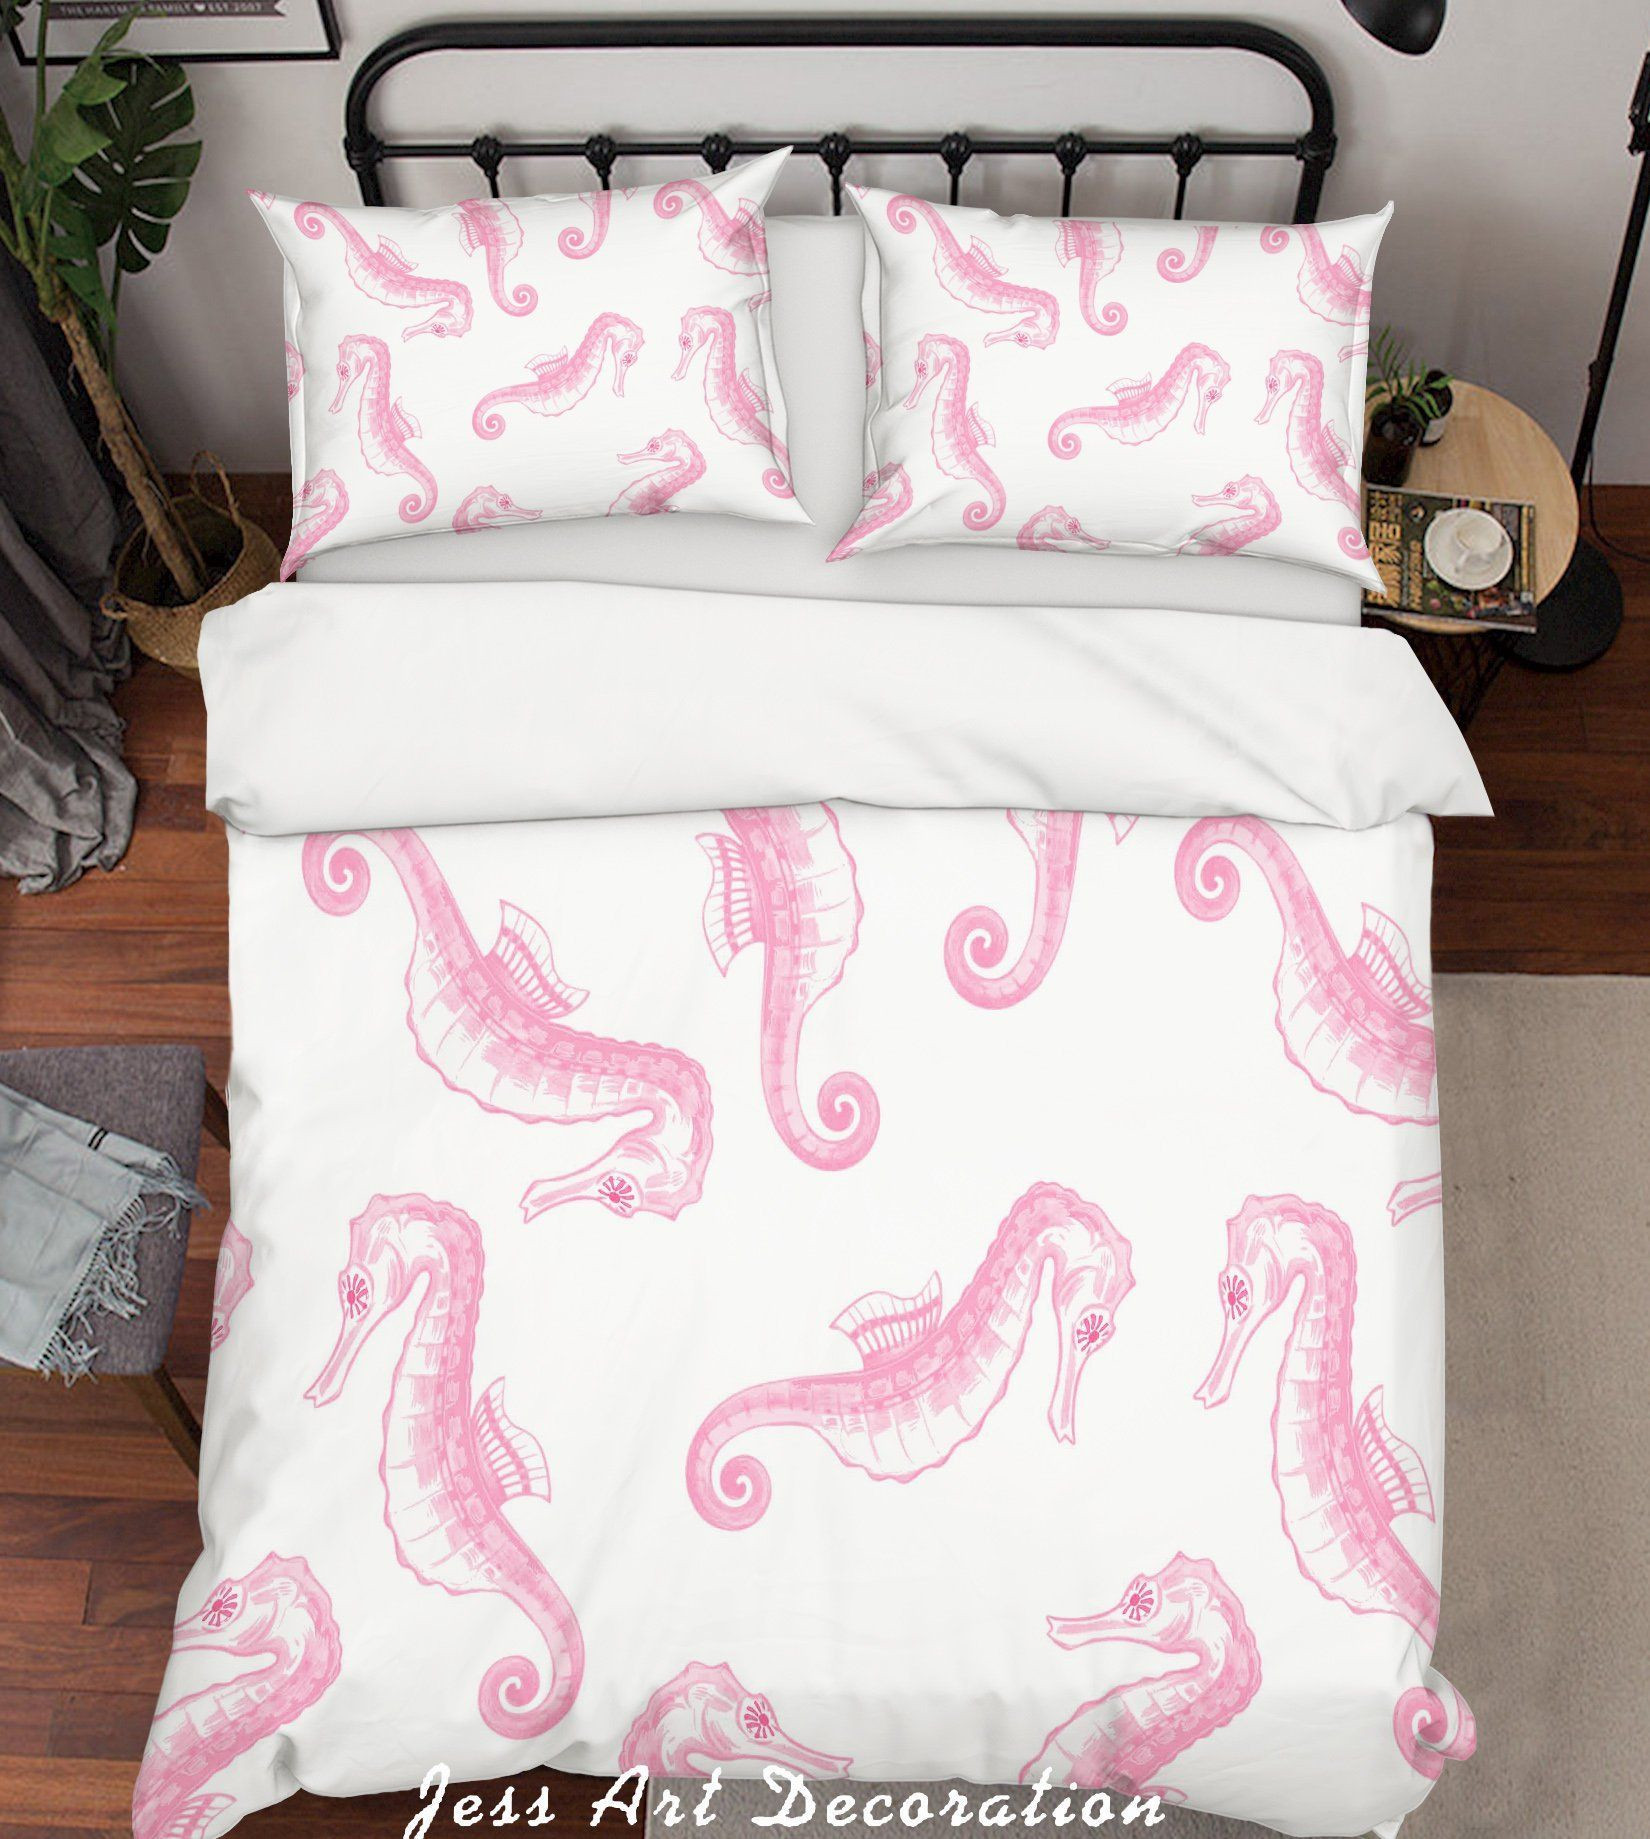 seahorse bedding set with sheets and duvet cover pqgf6